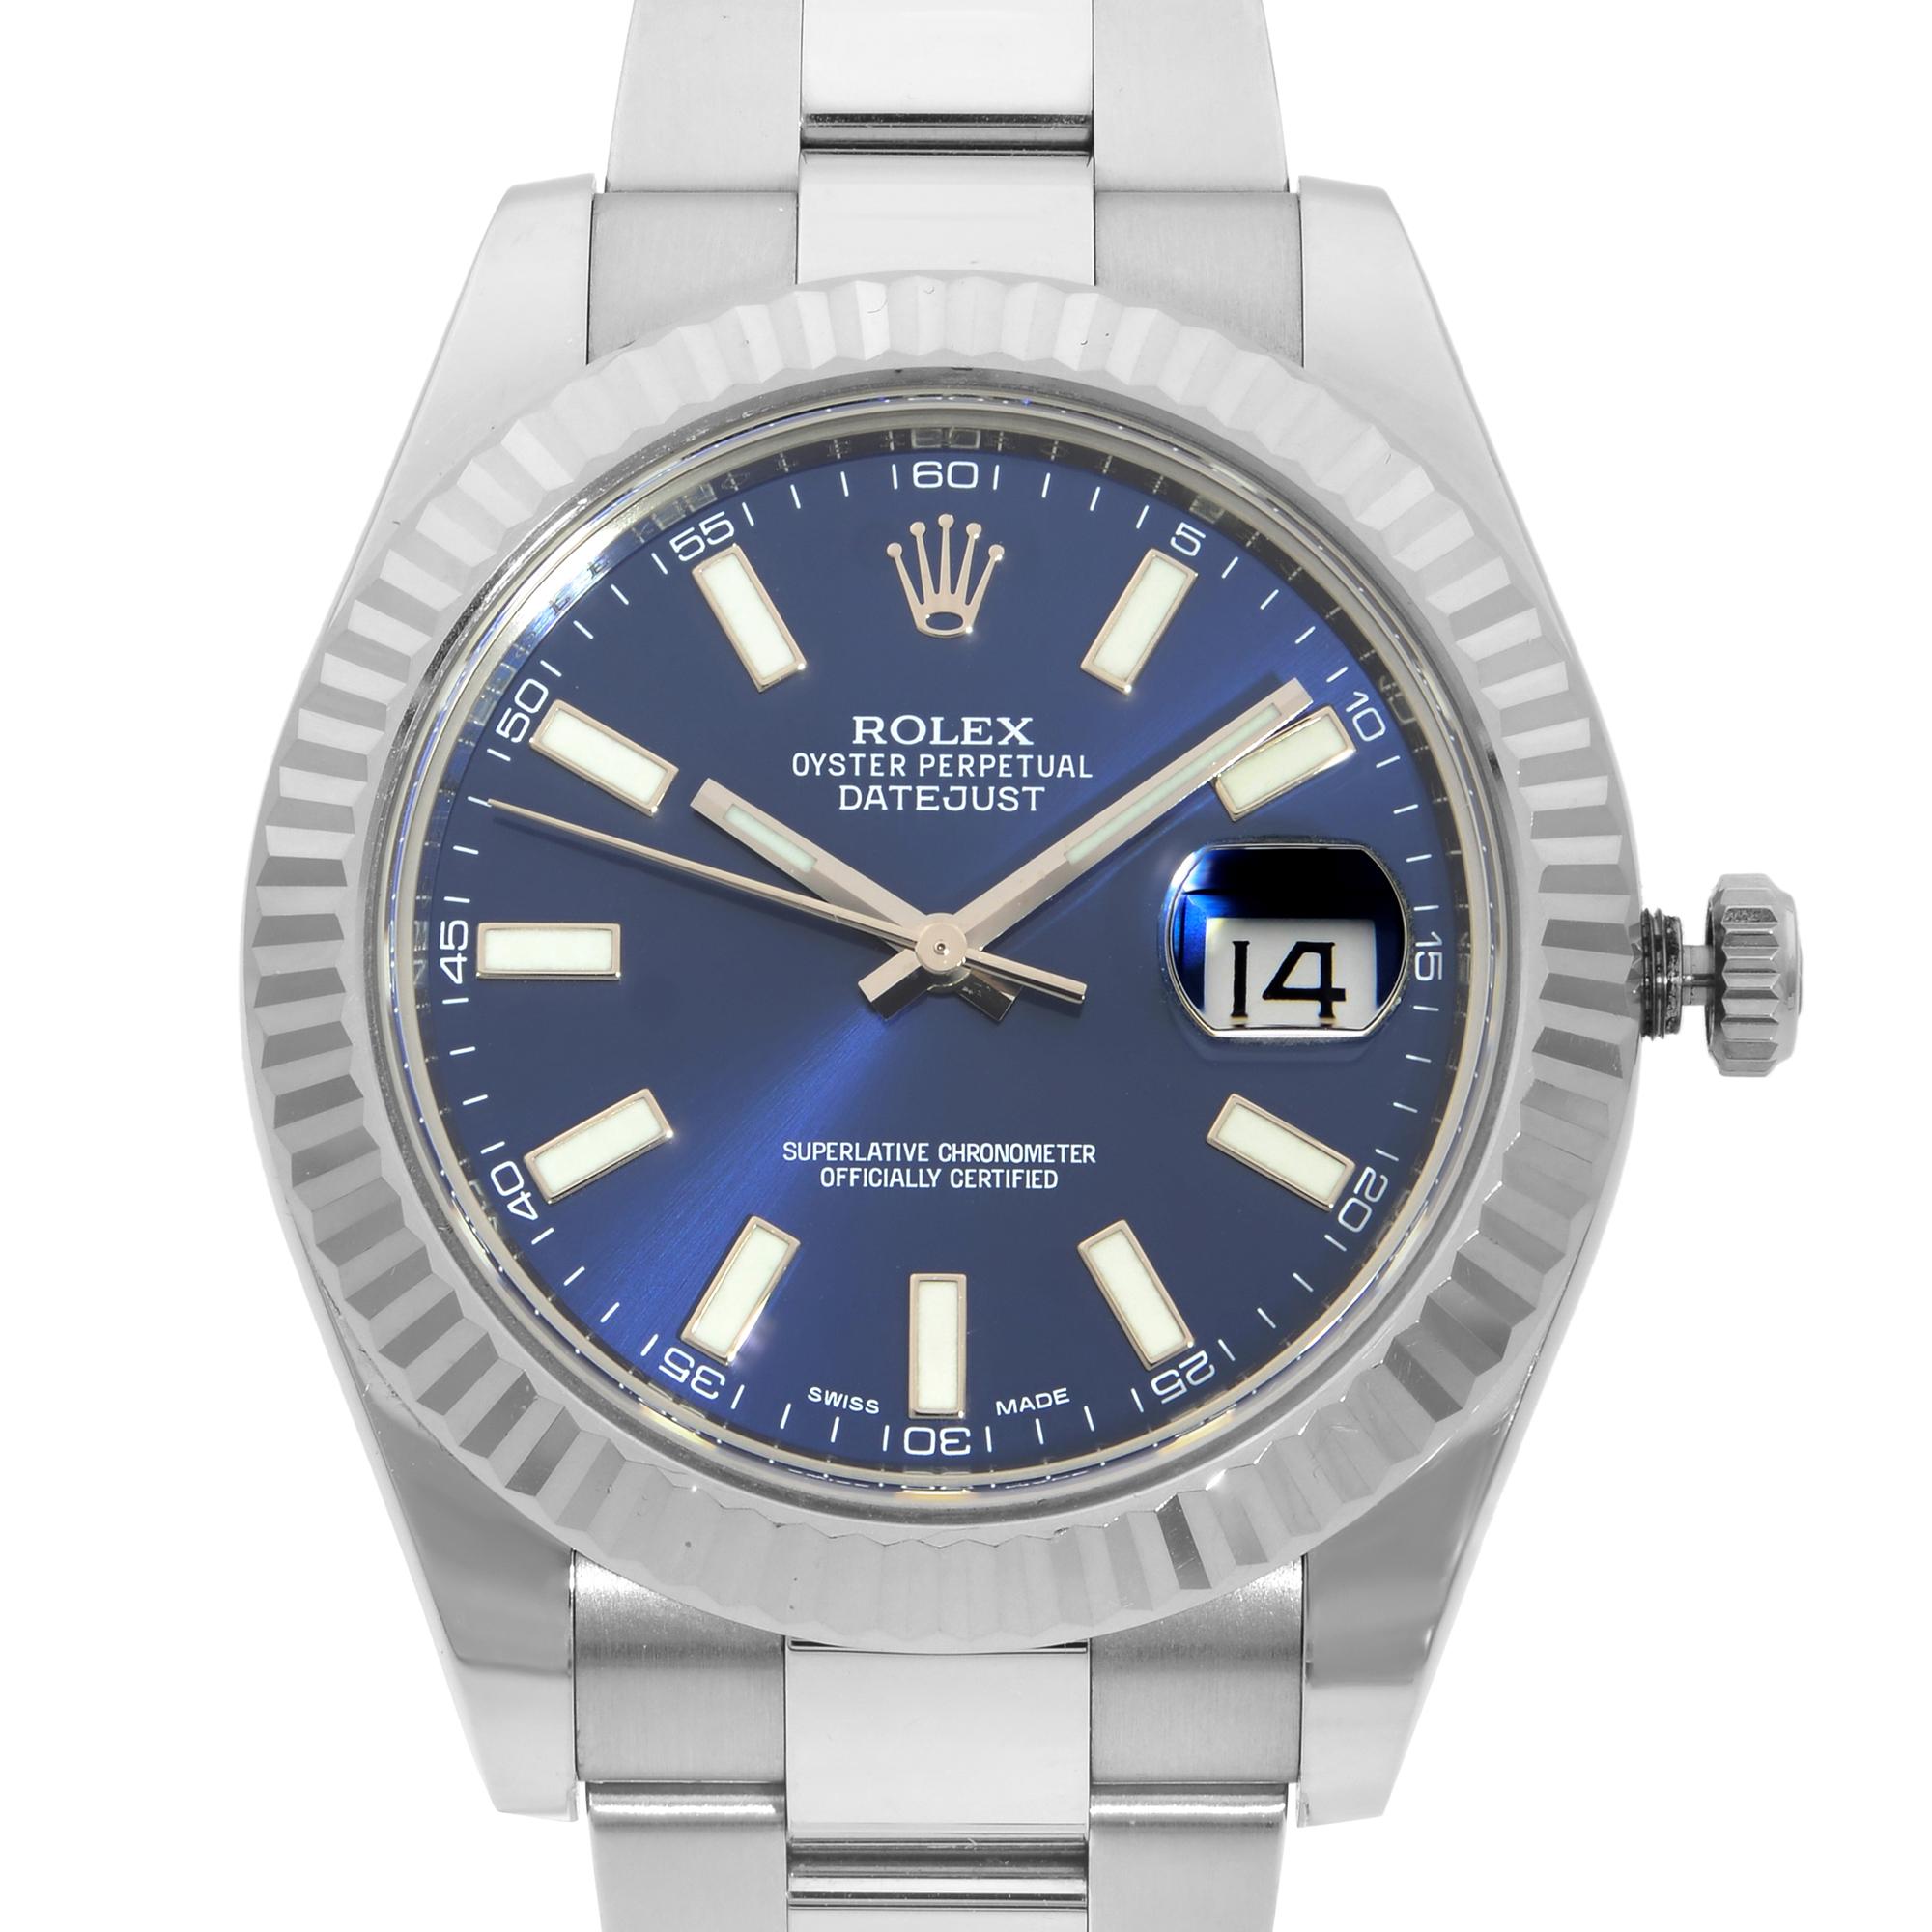 Original Box and Papers are not included comes with a seller presentation box and authenticity card. Covered by a one-year seller warranty
Details:
Brand Rolex
Department Men
Model Number 116334
Model Rolex Datejust 116334
Style Luxury
Band Color